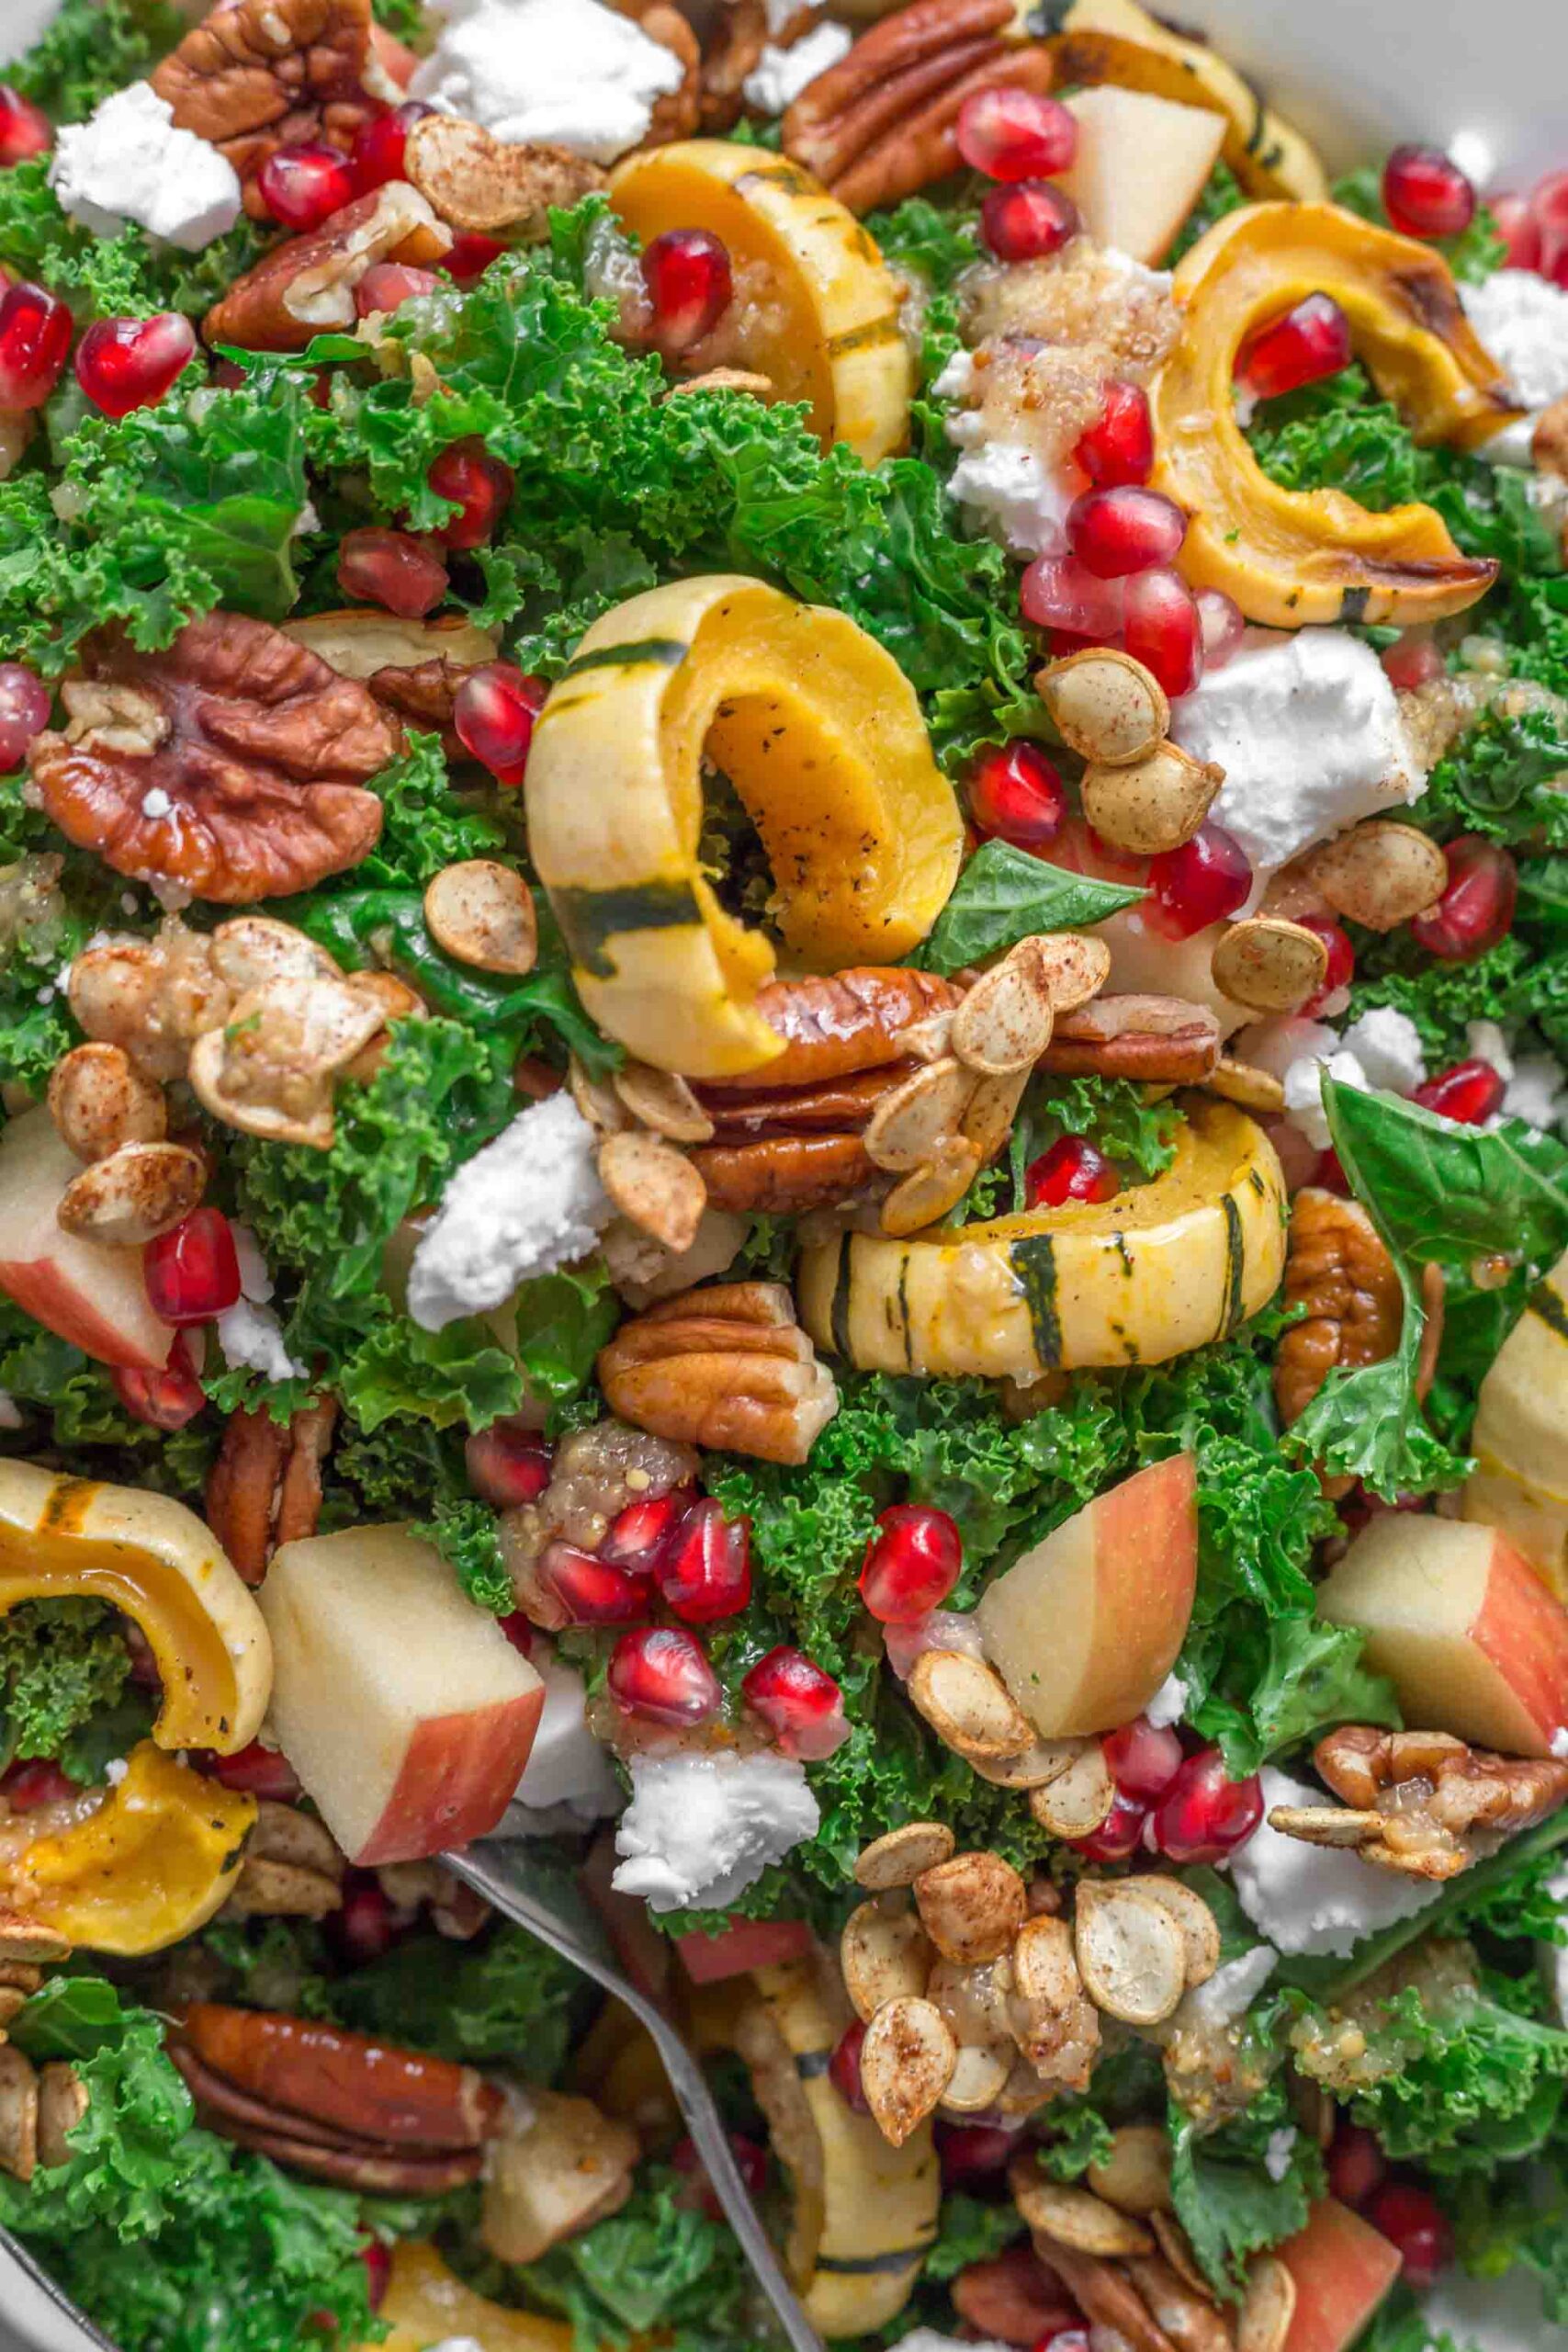 A delicata squash kale salad holiday dish with vibrant green kale and pomegranate seeds.